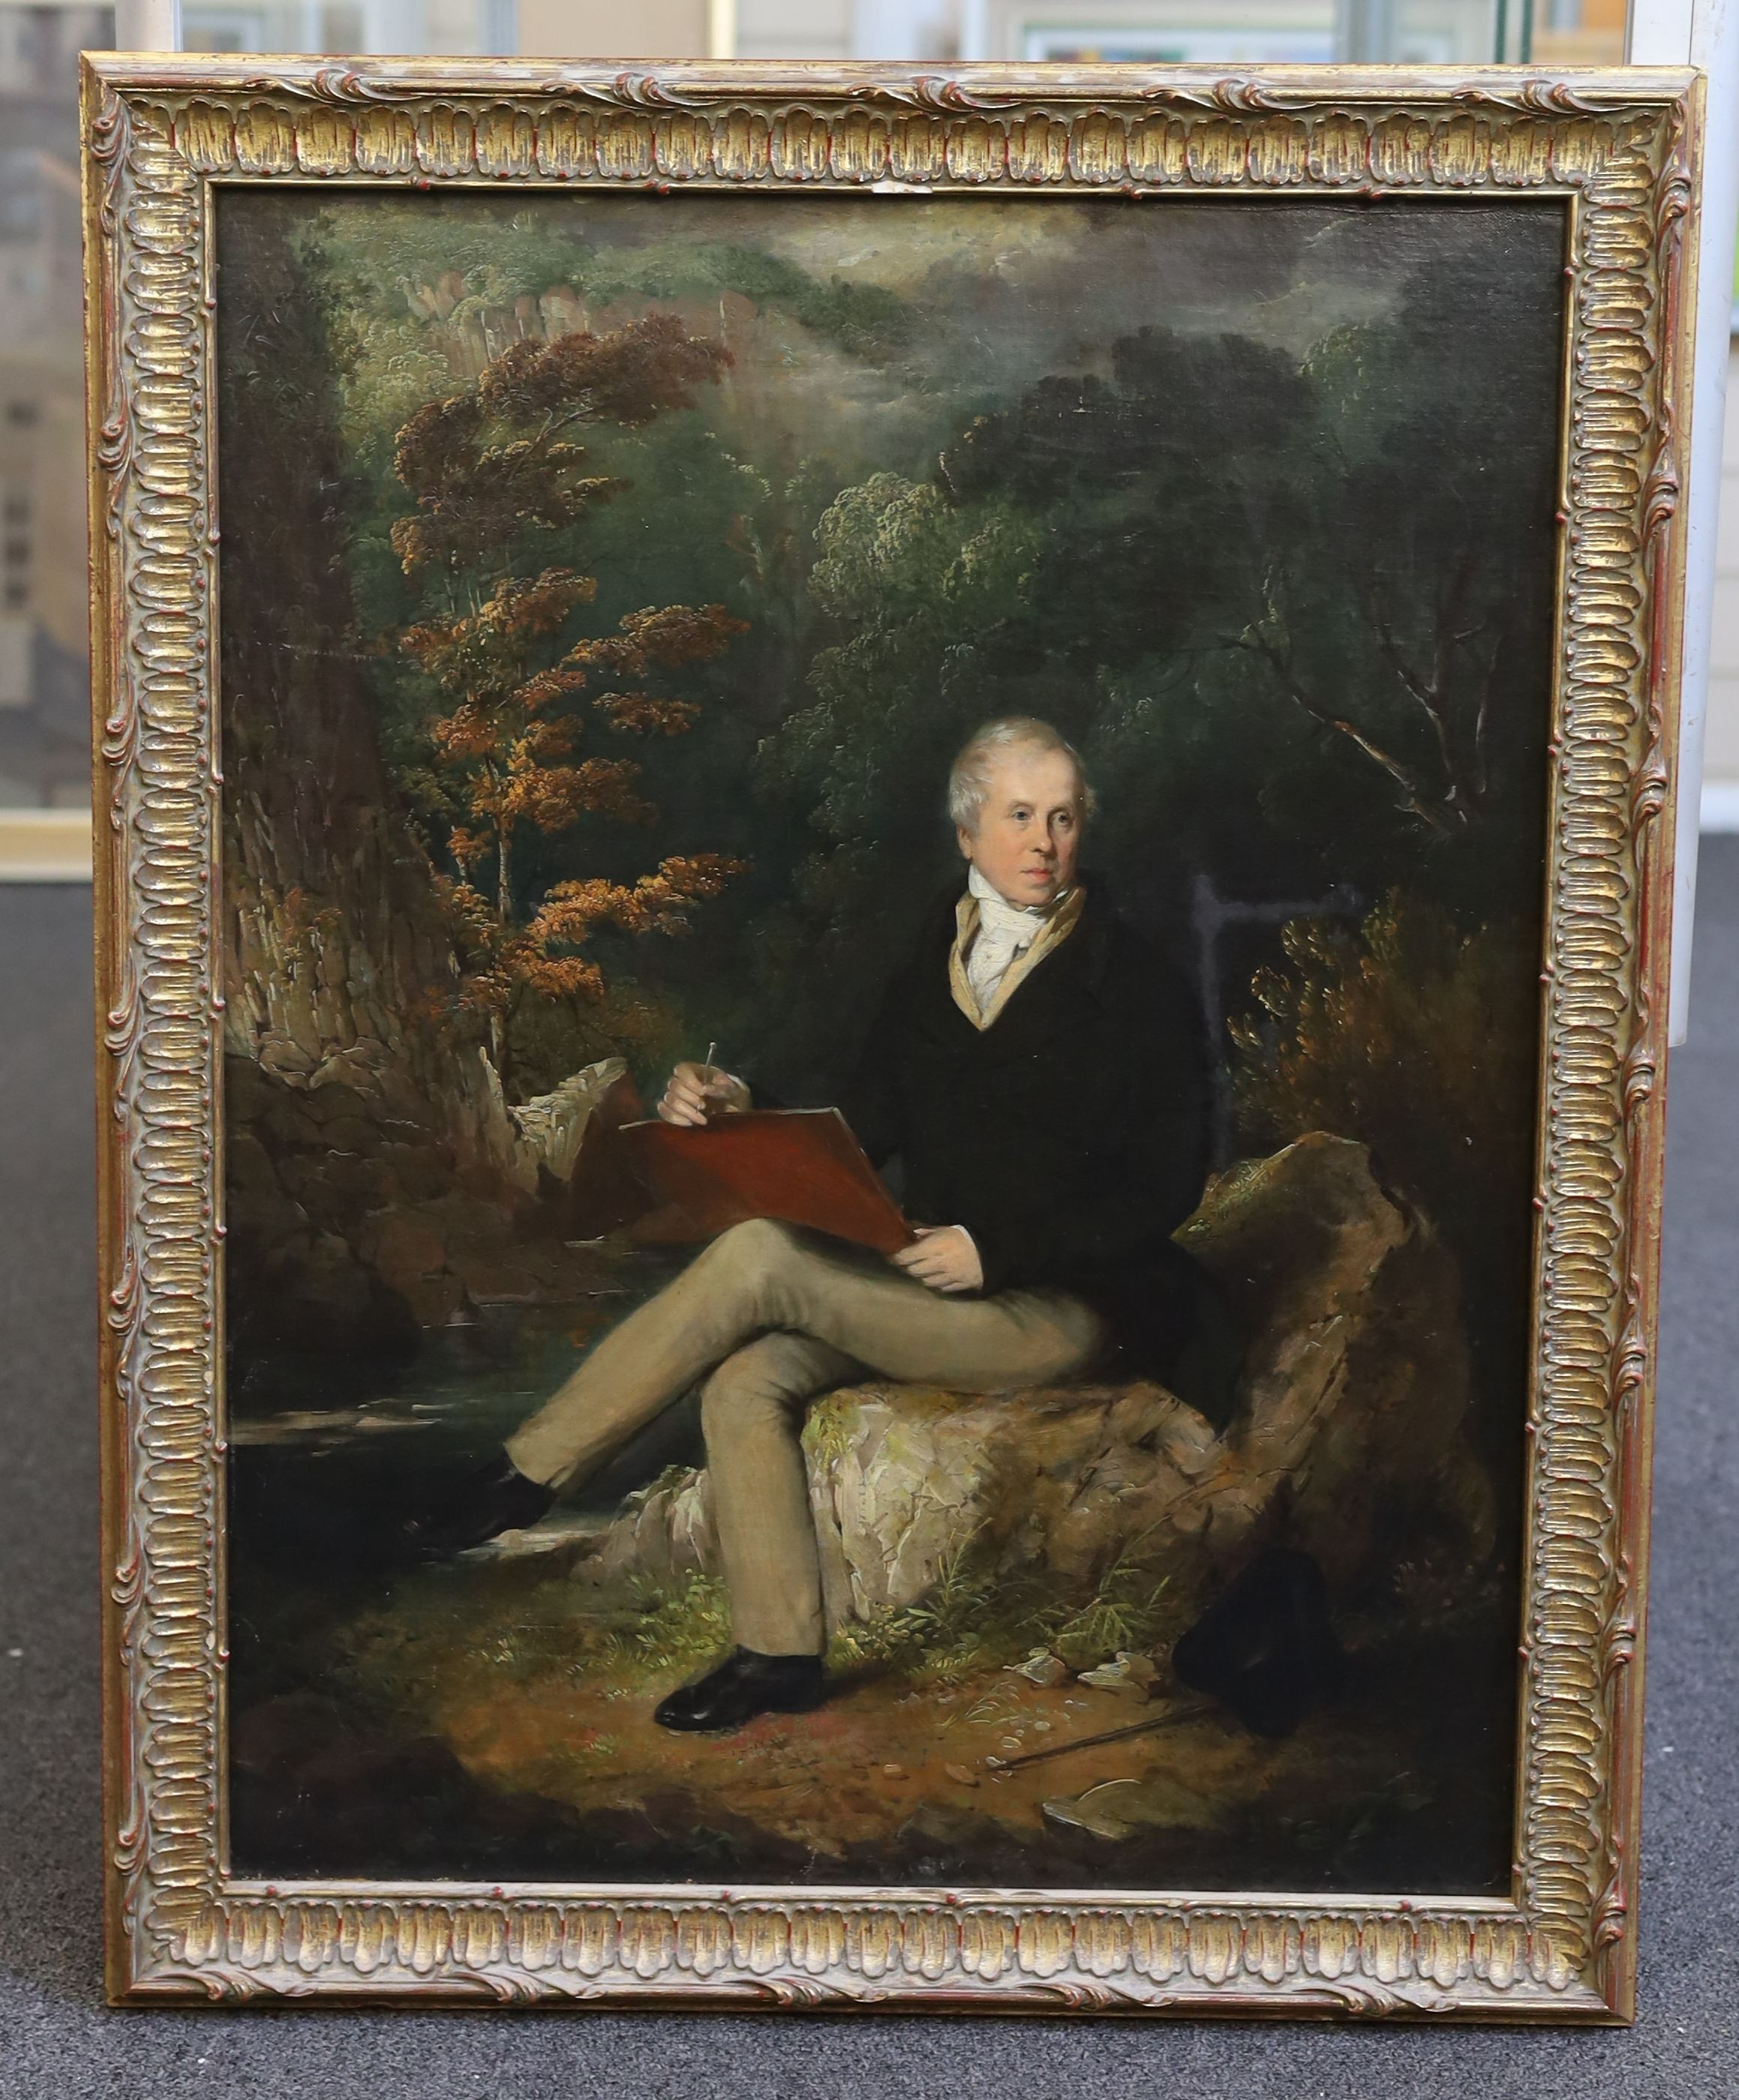 Alfred Frick (19th C.), Full length portrait of a gentleman seated in a landscape, sketching in a notebook, the sitter is possibly Charles Turner (1774-1857), an engraver and draughtsman, oil on canvas, 64 x 49cm